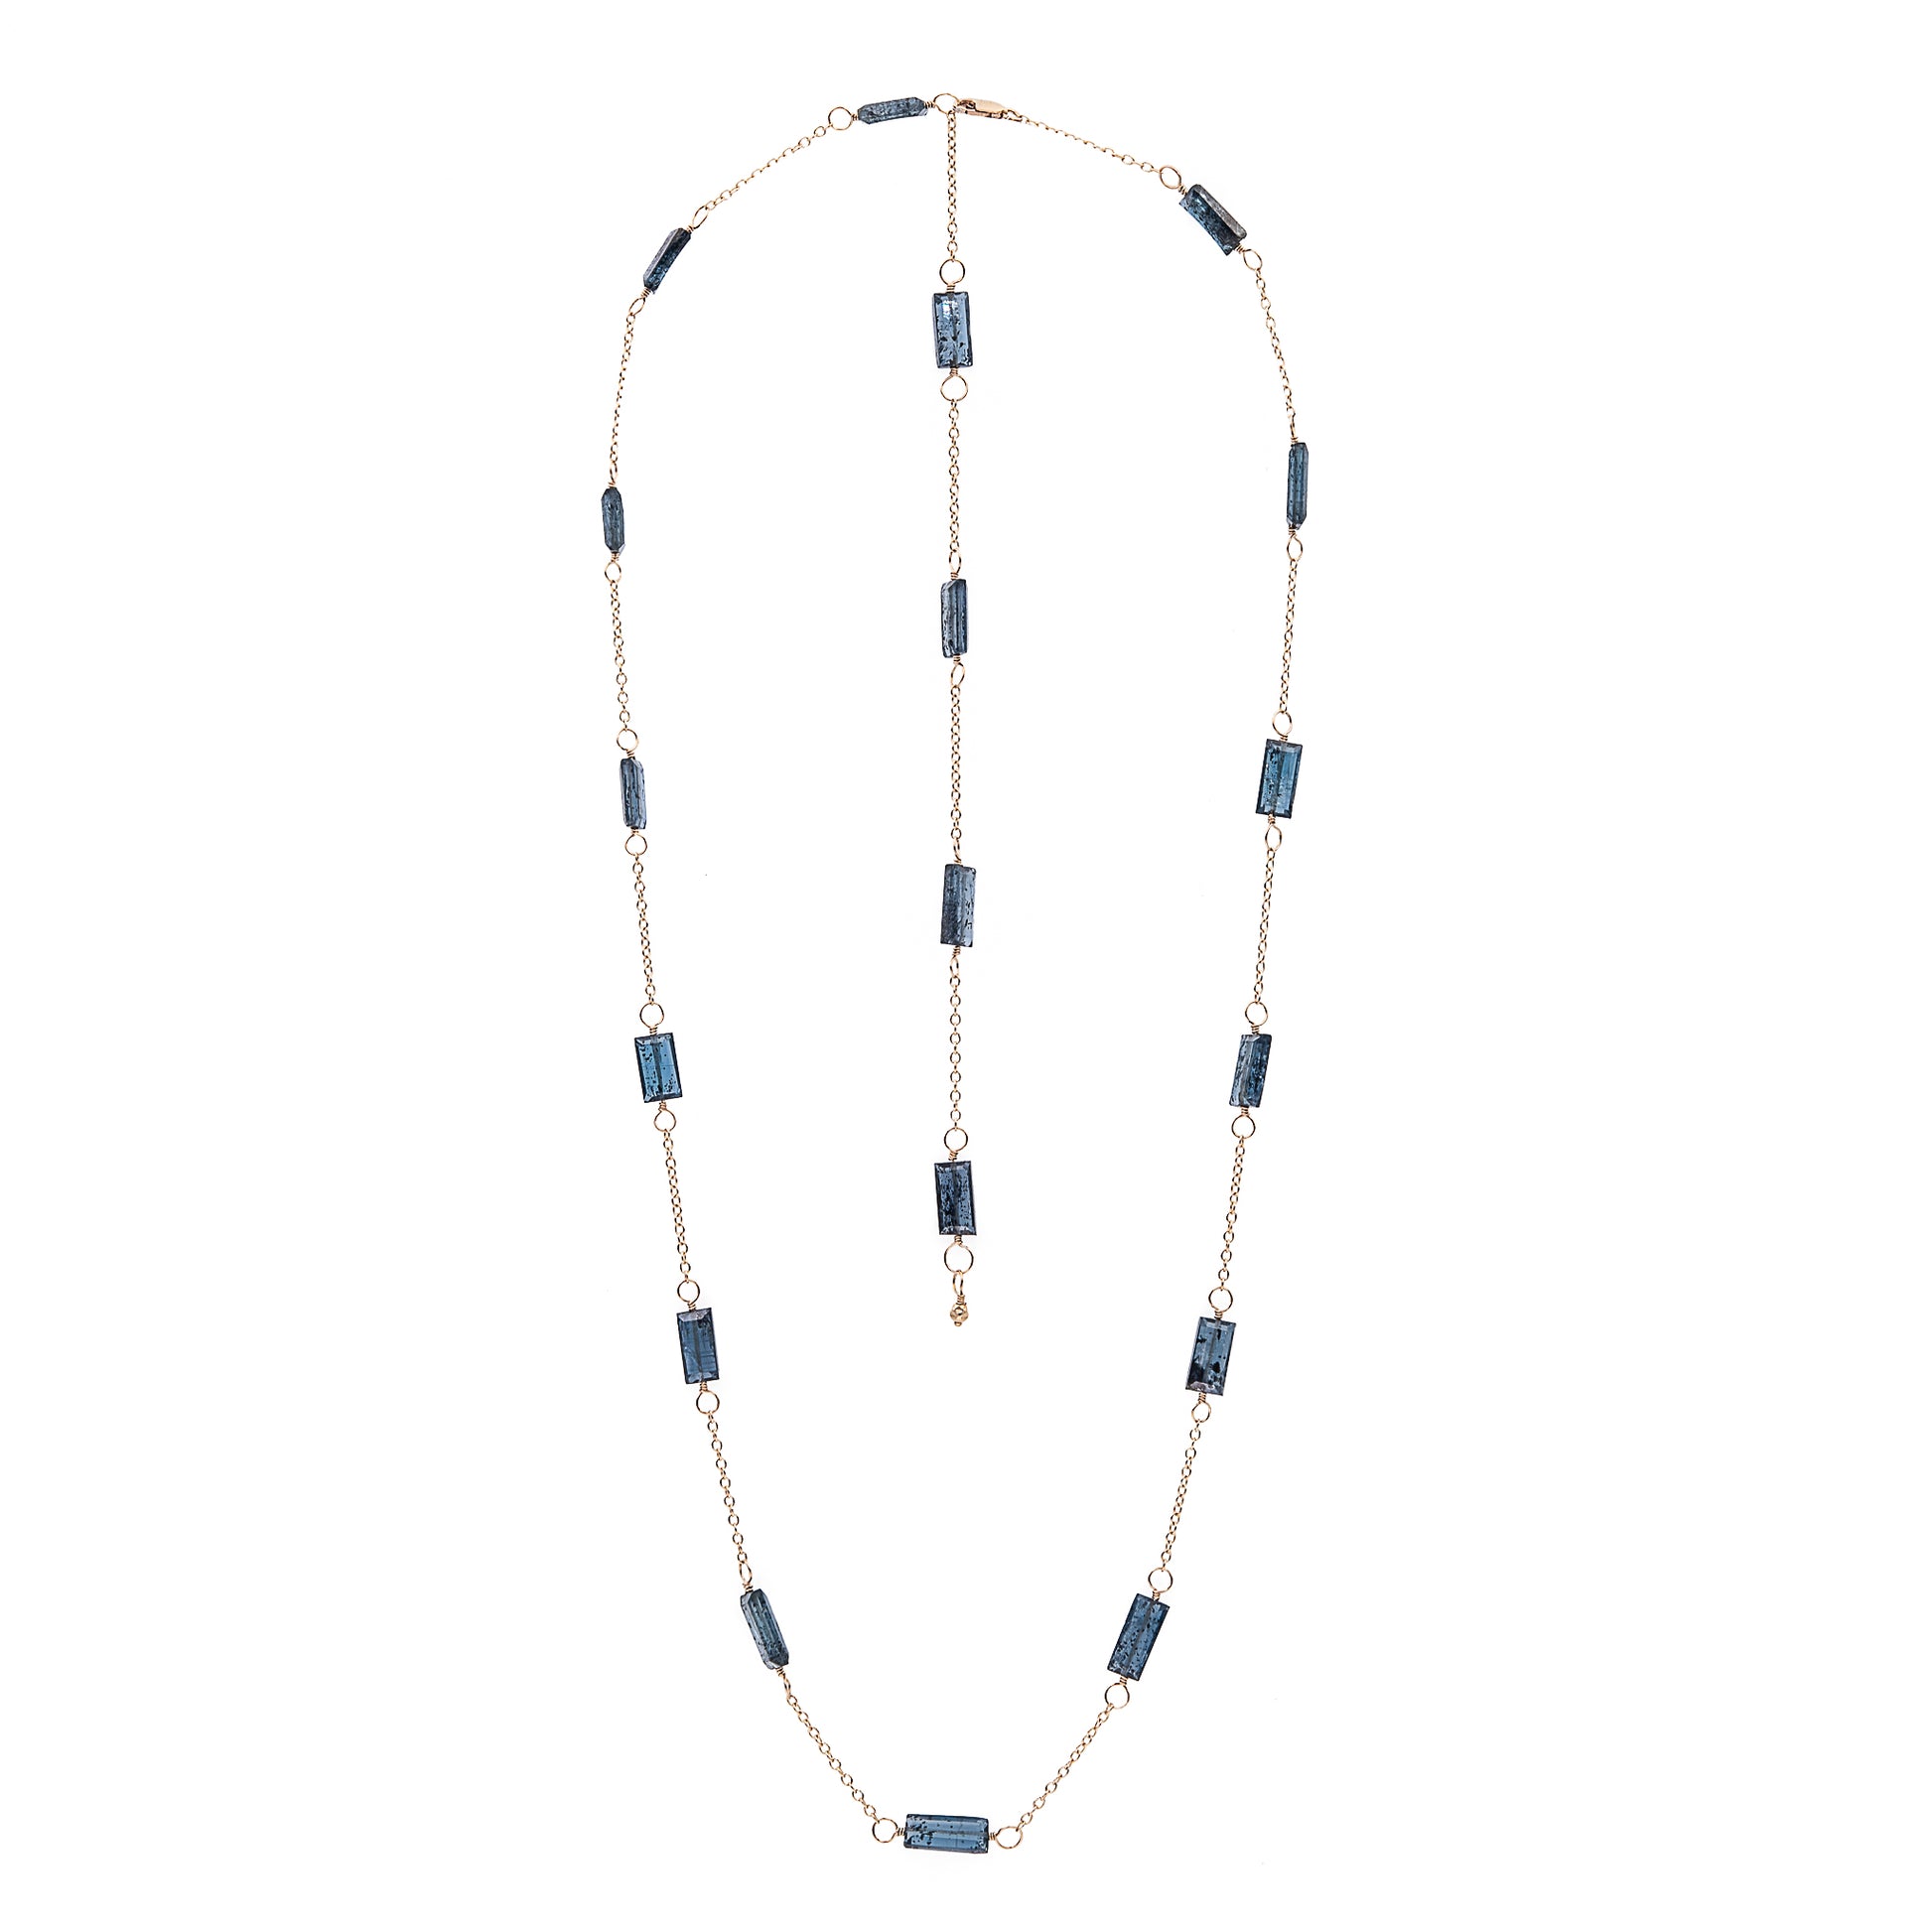 Zurina Ketola long moss aquamarine necklace in 14K gold fill shown as a shorter length with long chain and gemstone detail at clasp on white background.